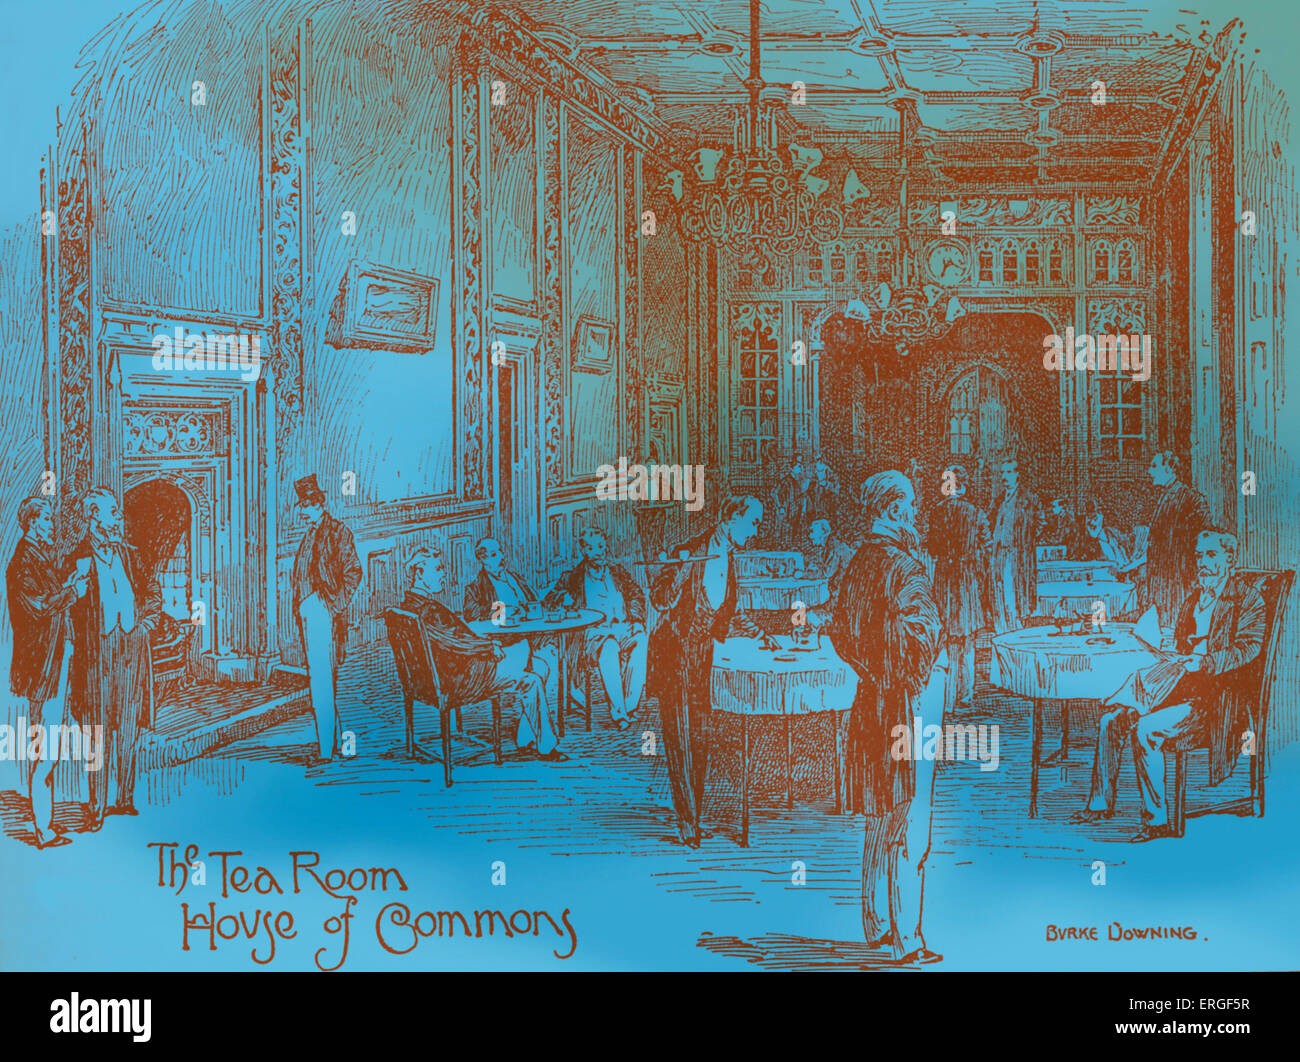 The Tea Room, House of Commons, Palace of Westminster, London, UK.  Late 19th century illustration. Stock Photo